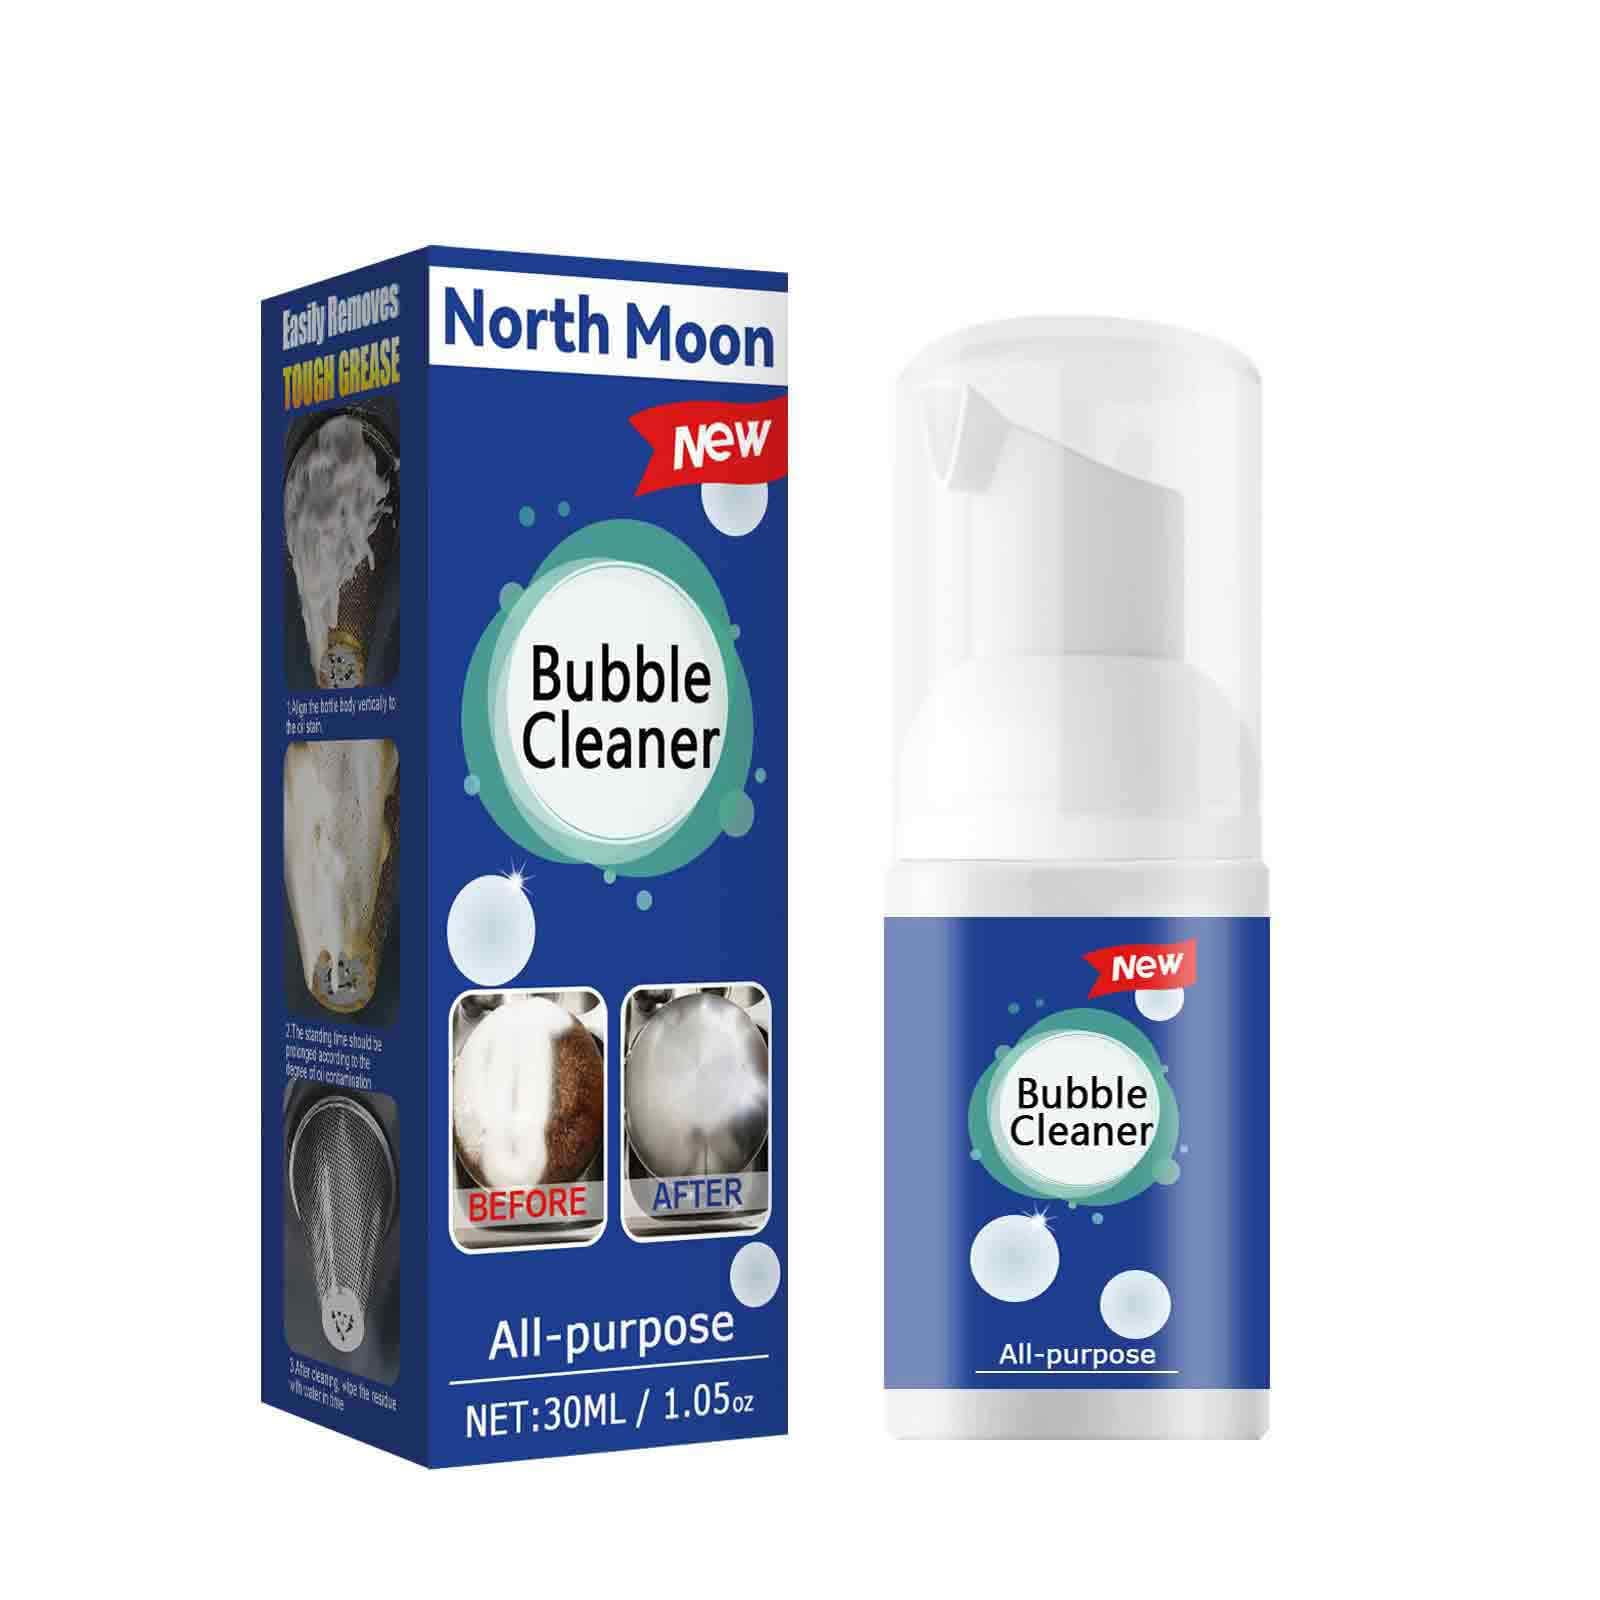  Bubble Cleaner - Bubble Cleaner Foam Spray, Kitchen Clean Bubble  Cleaner Foam, North Moon Bubble Cleaner Foam, All Purpose Deep Cleaner with  Sponge and Towel for Grill, Oven, Pots (100ml/3pcs) 